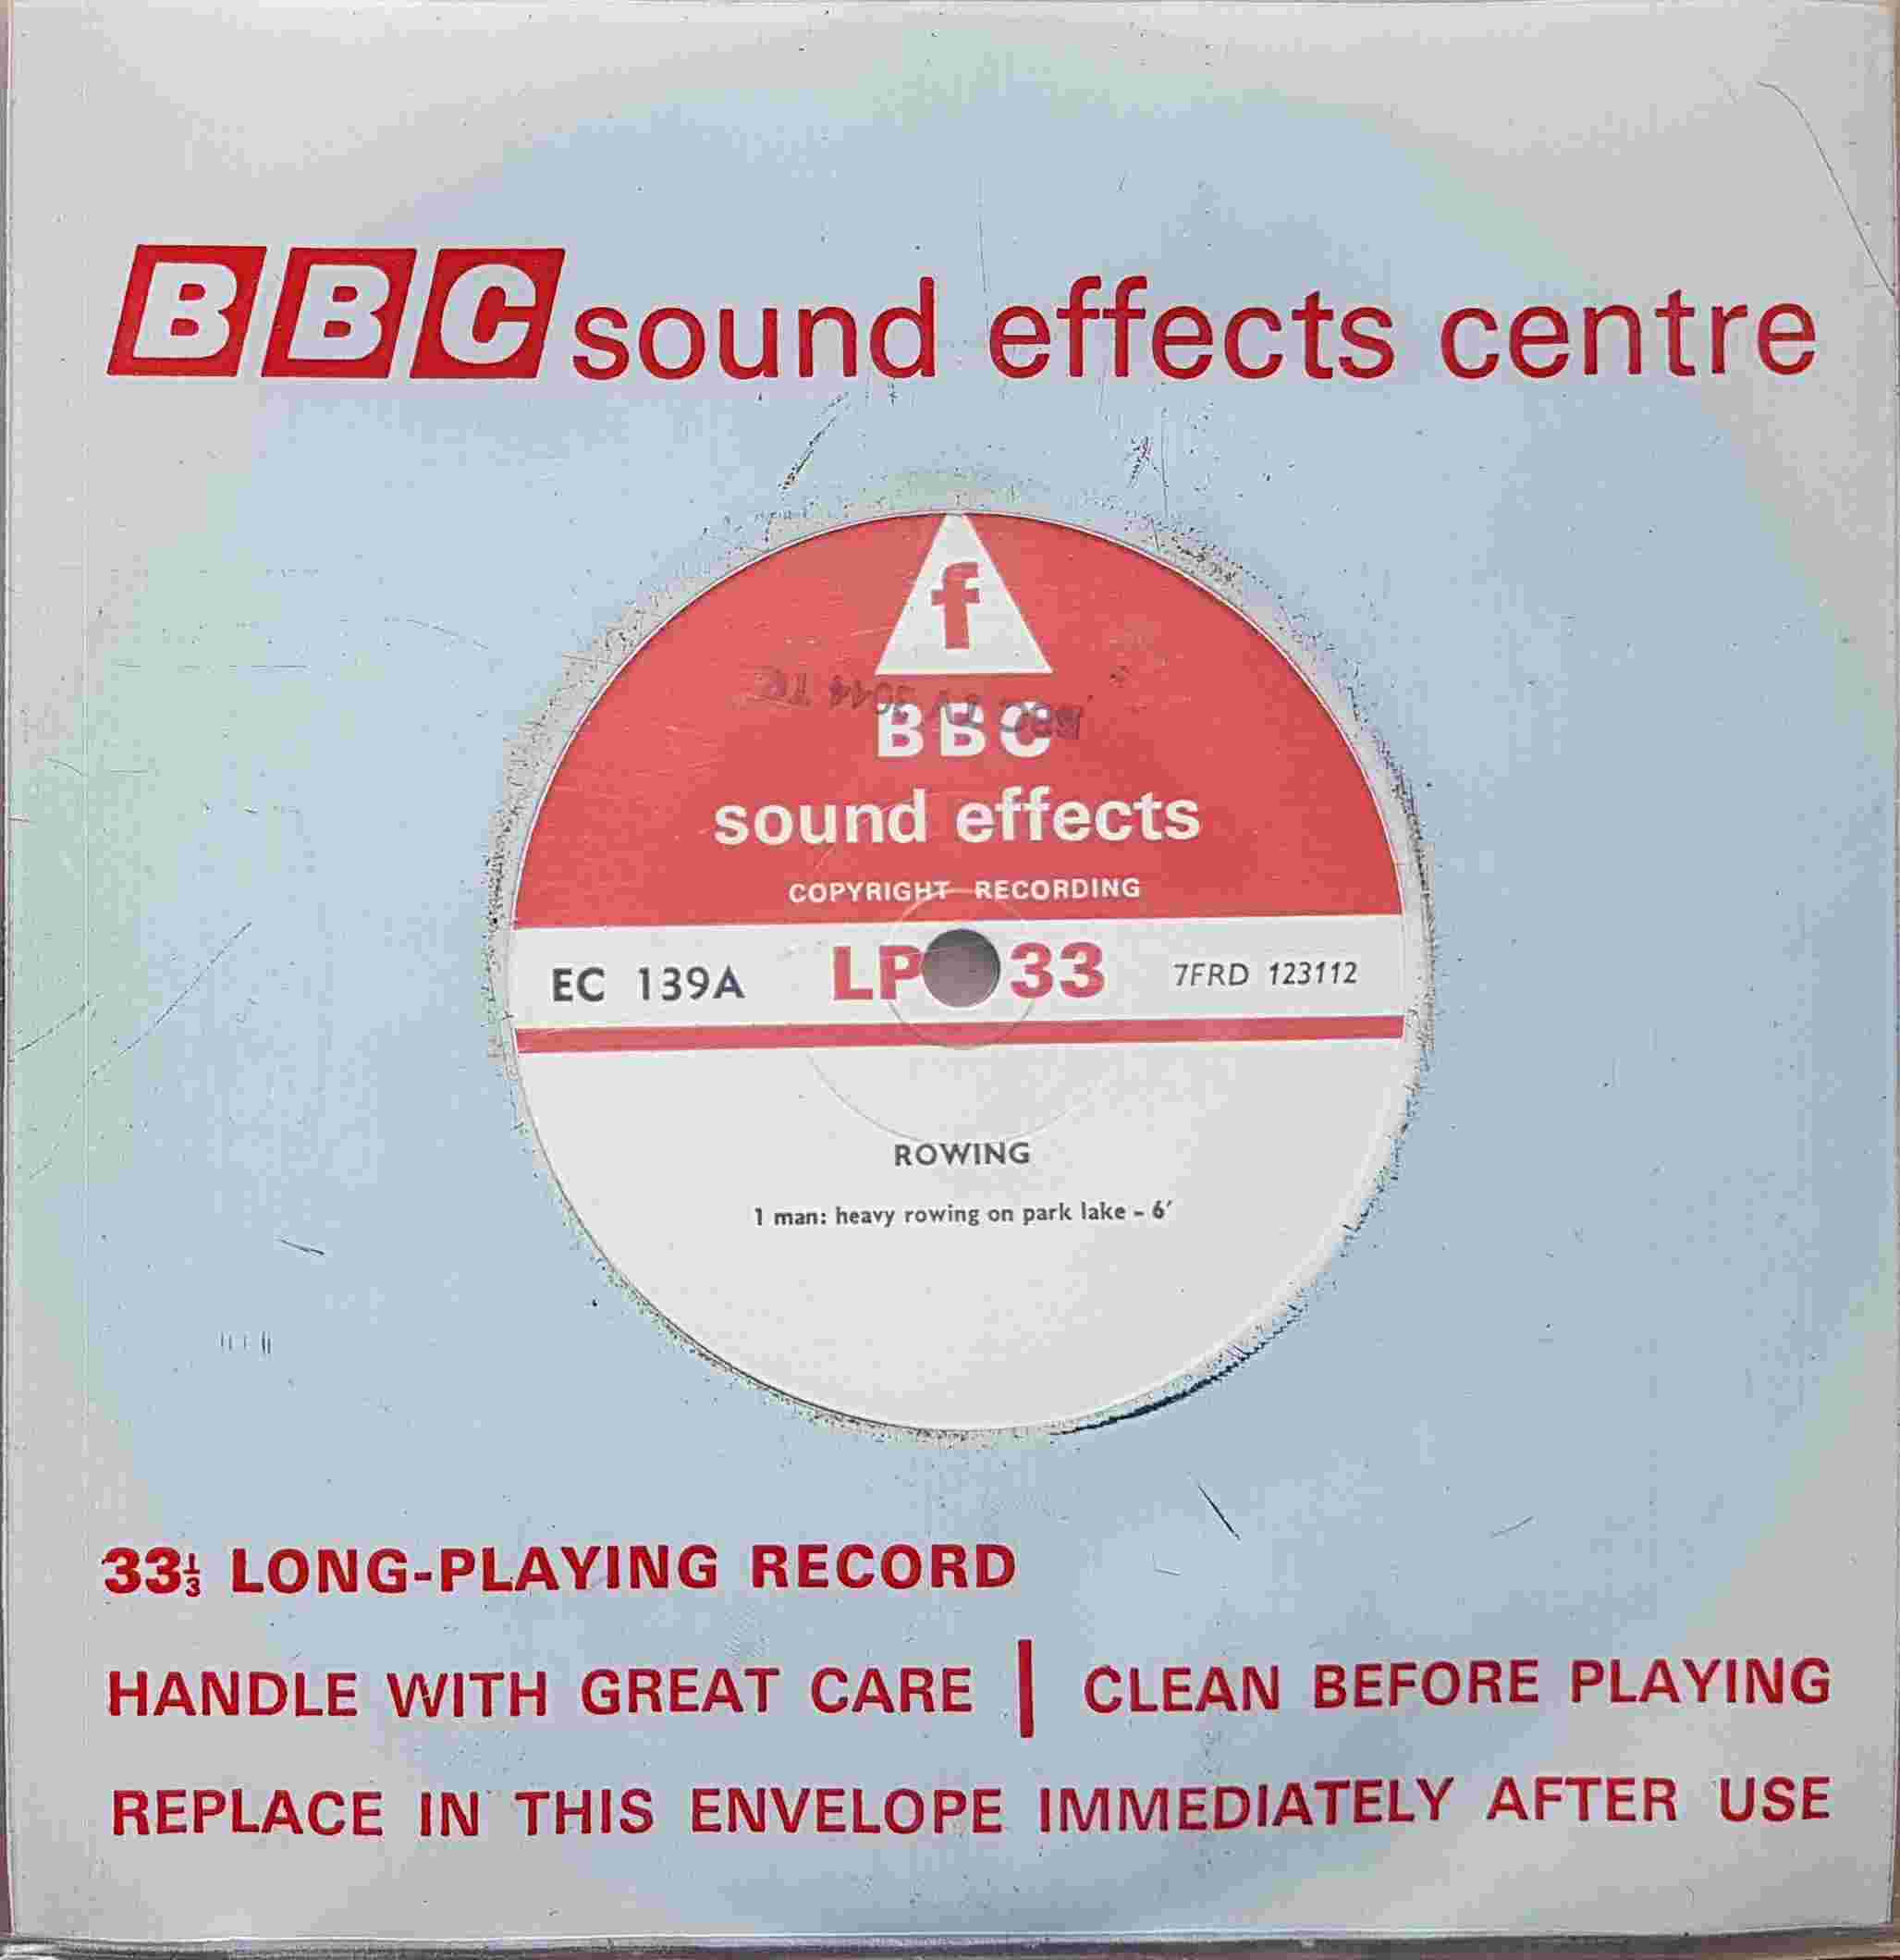 Picture of EC 139A Rowing by artist Not registered from the BBC singles - Records and Tapes library